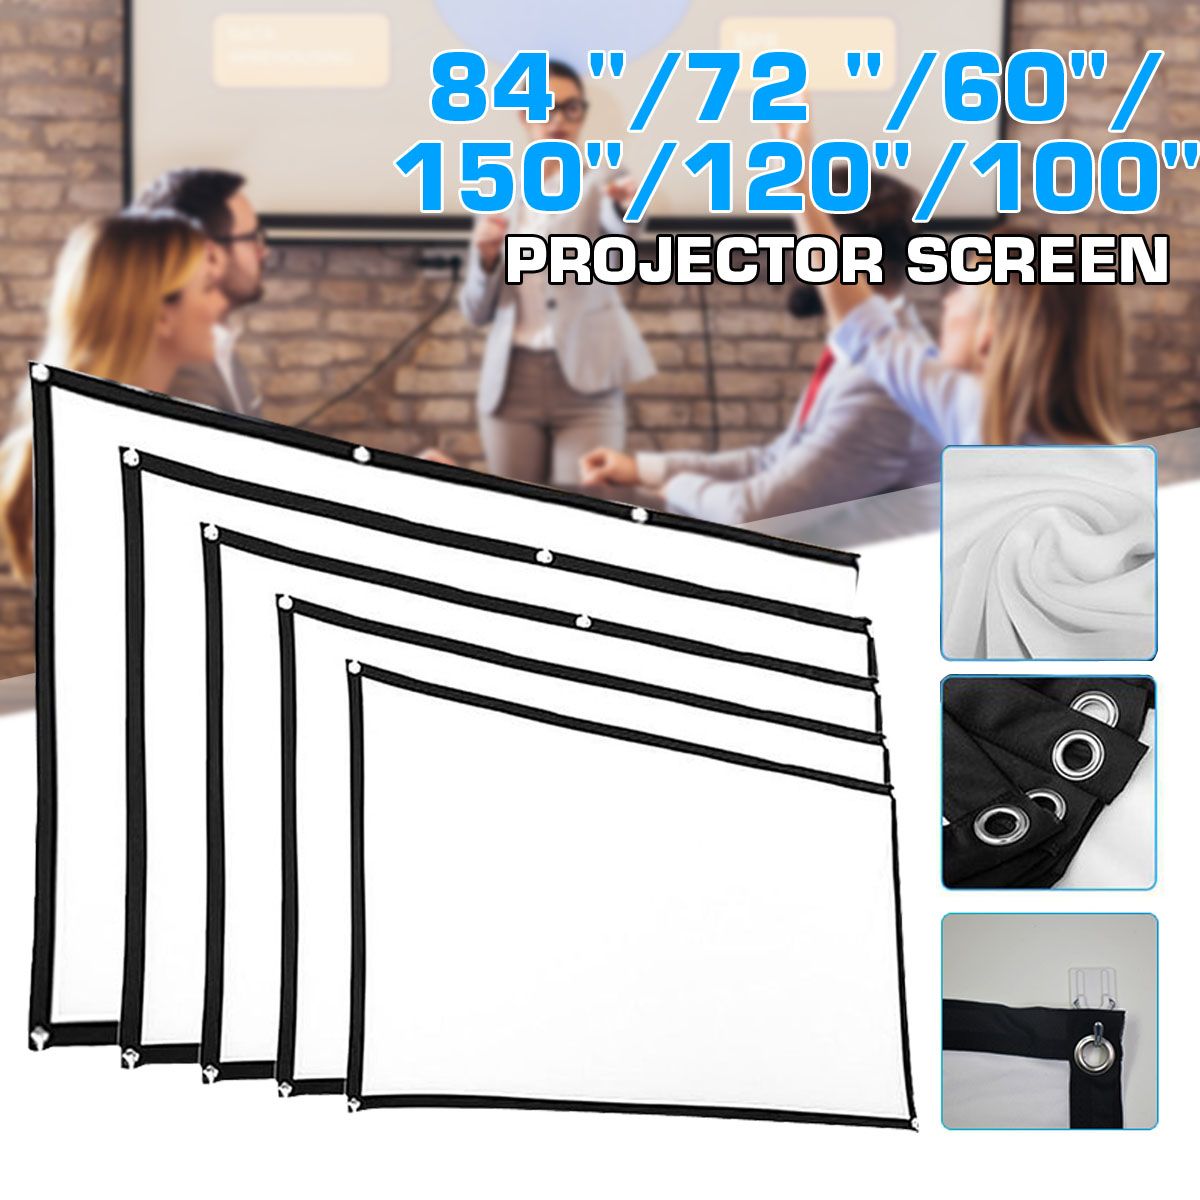 607284100120150-Inch-169-Projector-Screen-Home-Projection-Manual-Hanging-Home-Theater-Movie-1713594